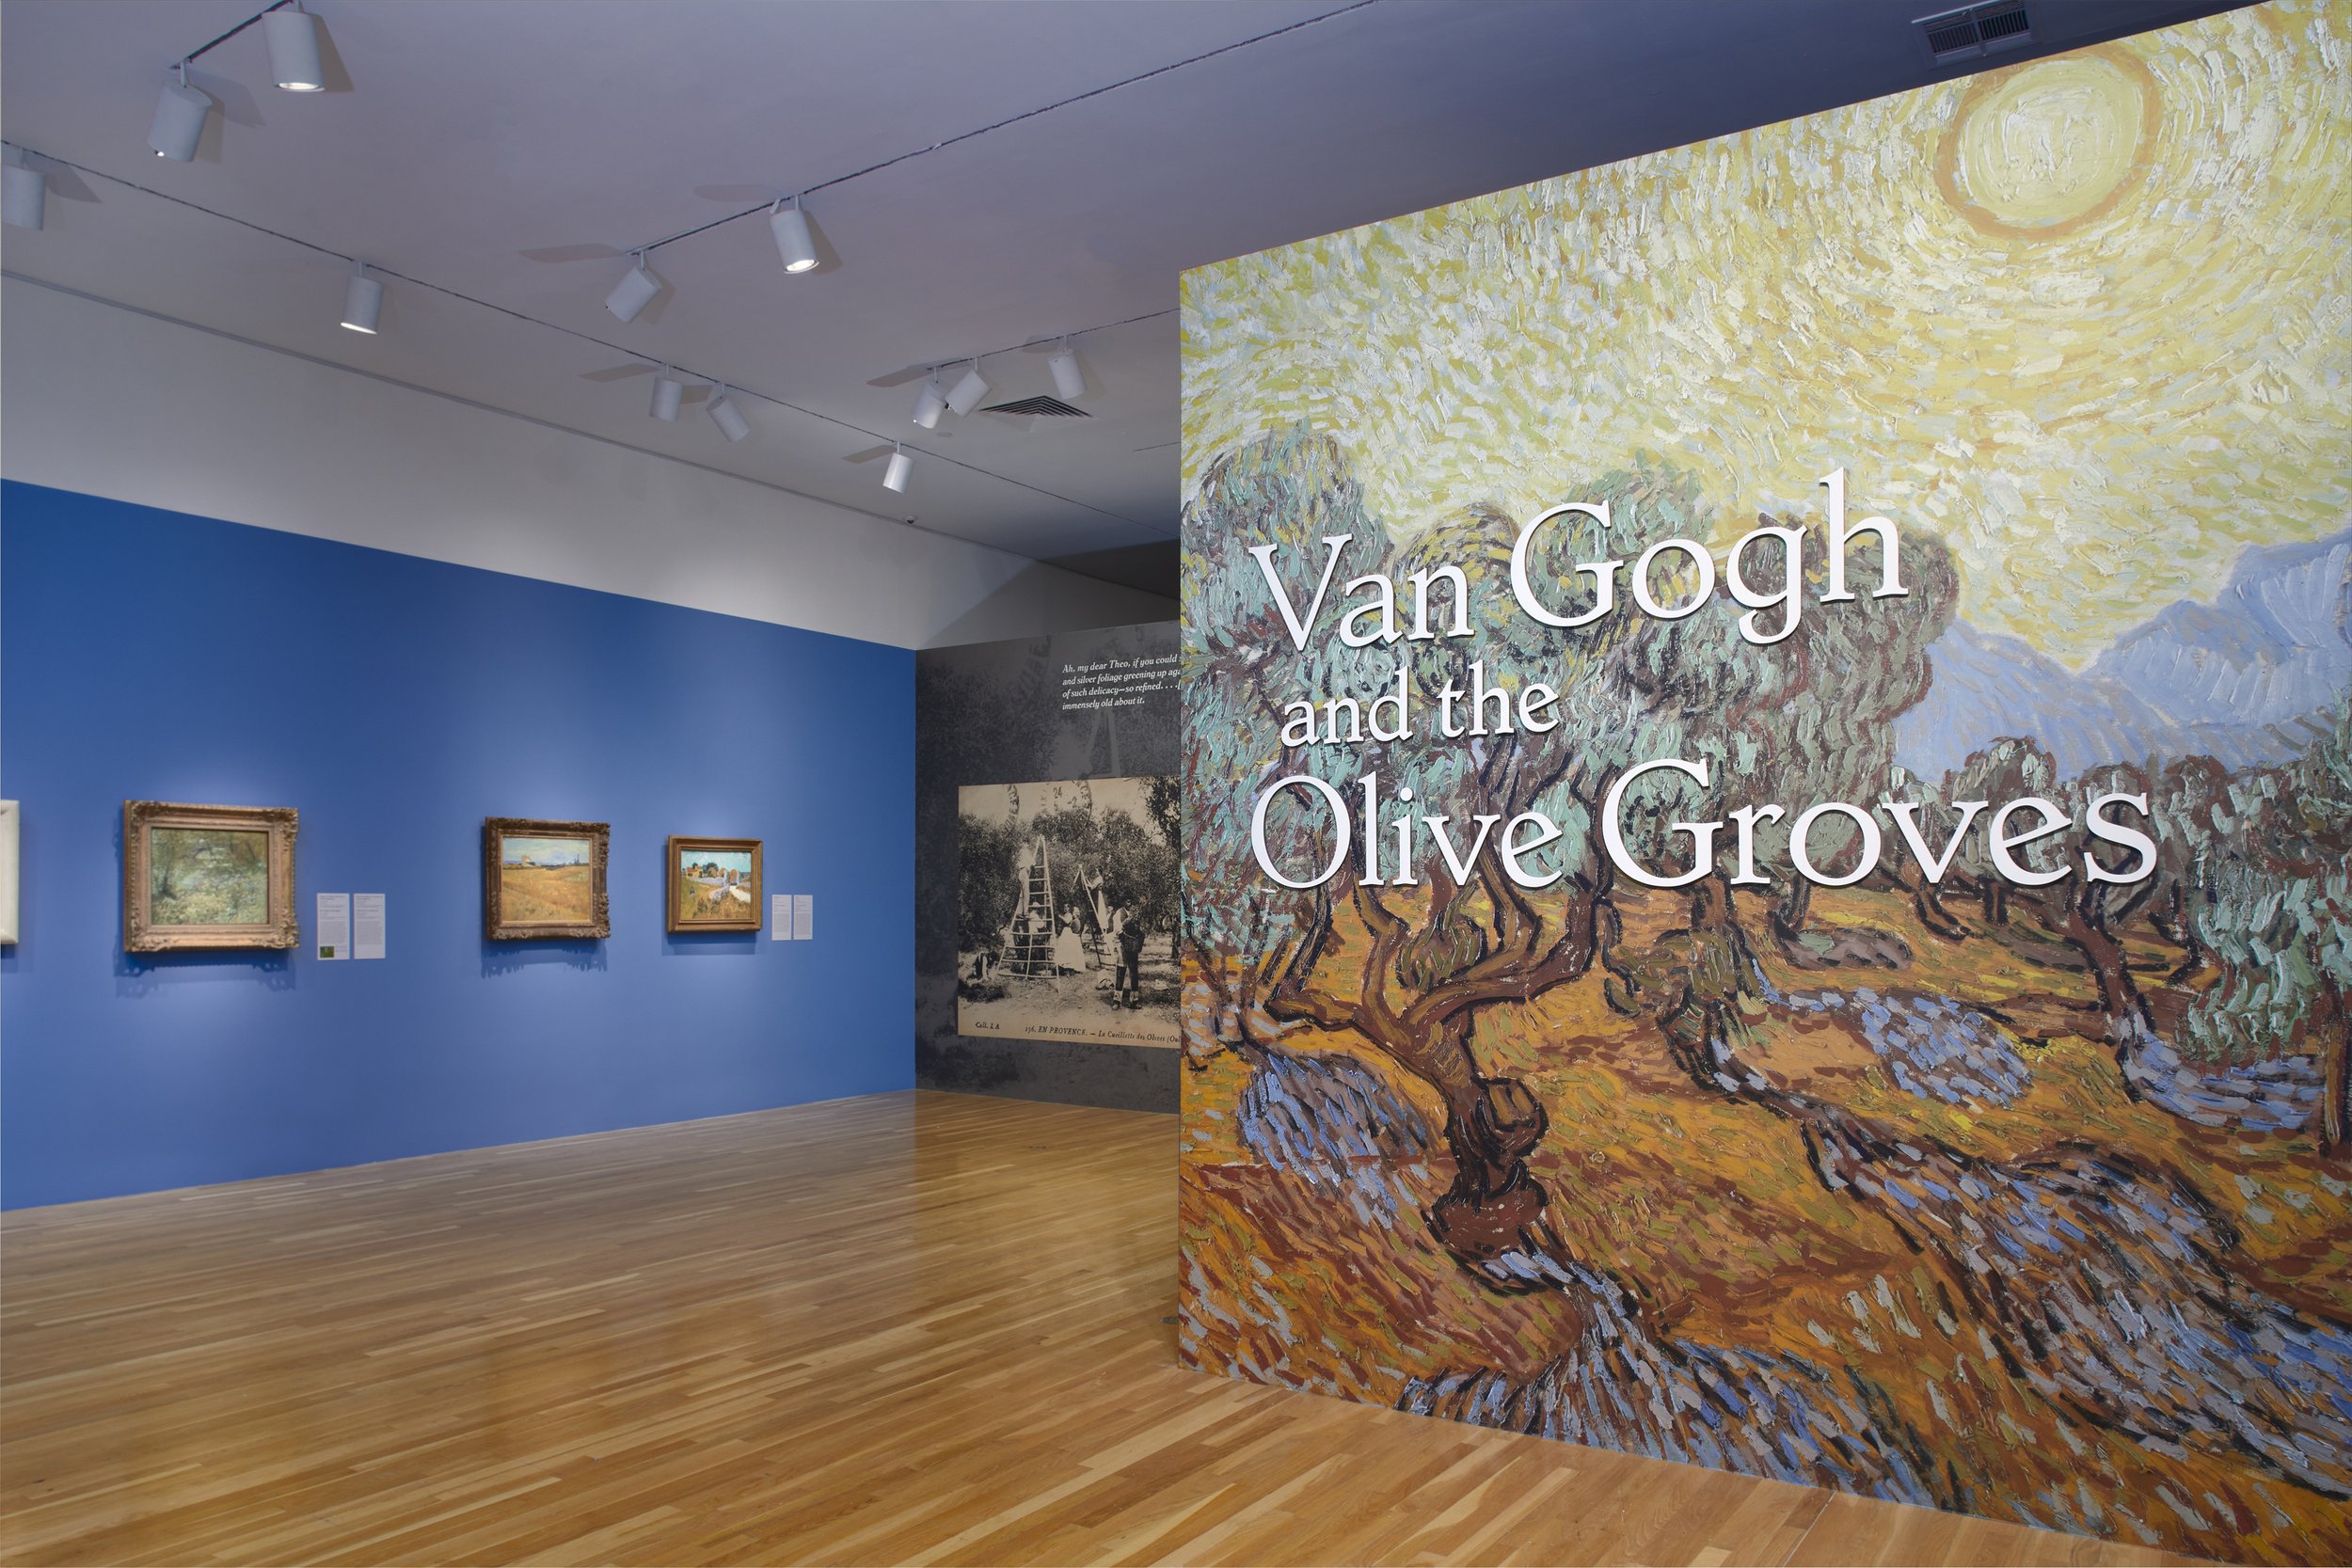 Van Gogh and the Olive Groves_Photo by John Smith, courtesy of Dallas Museum of Art_02_sm.jpg